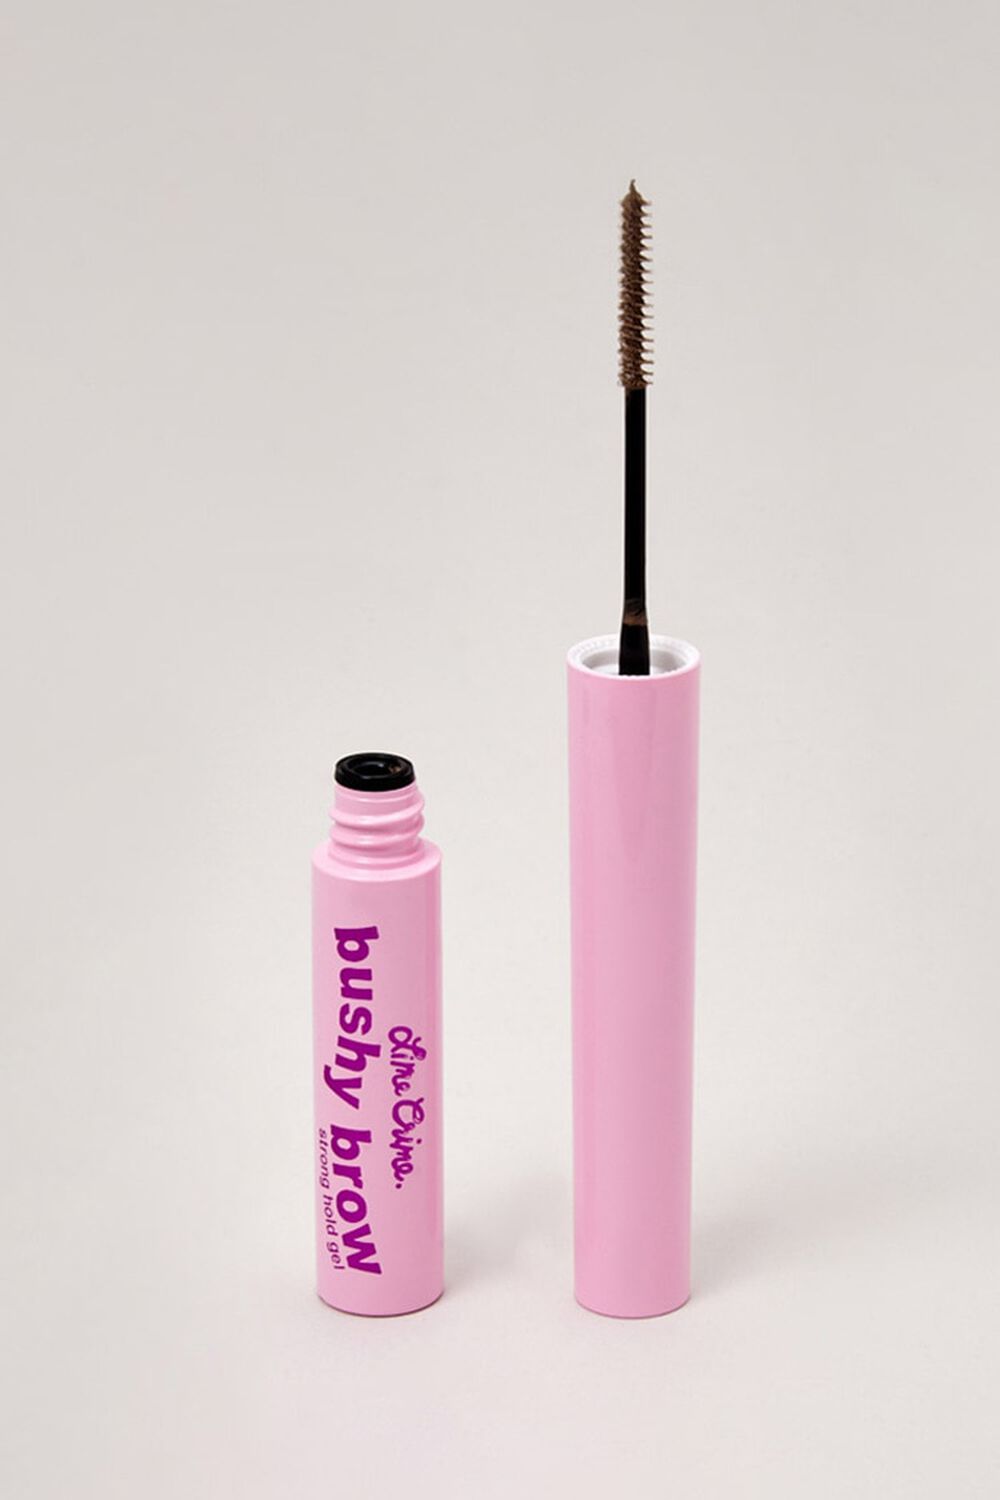 DIRTY BLONDE Lime Crime Bushy Brow Strong Hold Gel, image 1